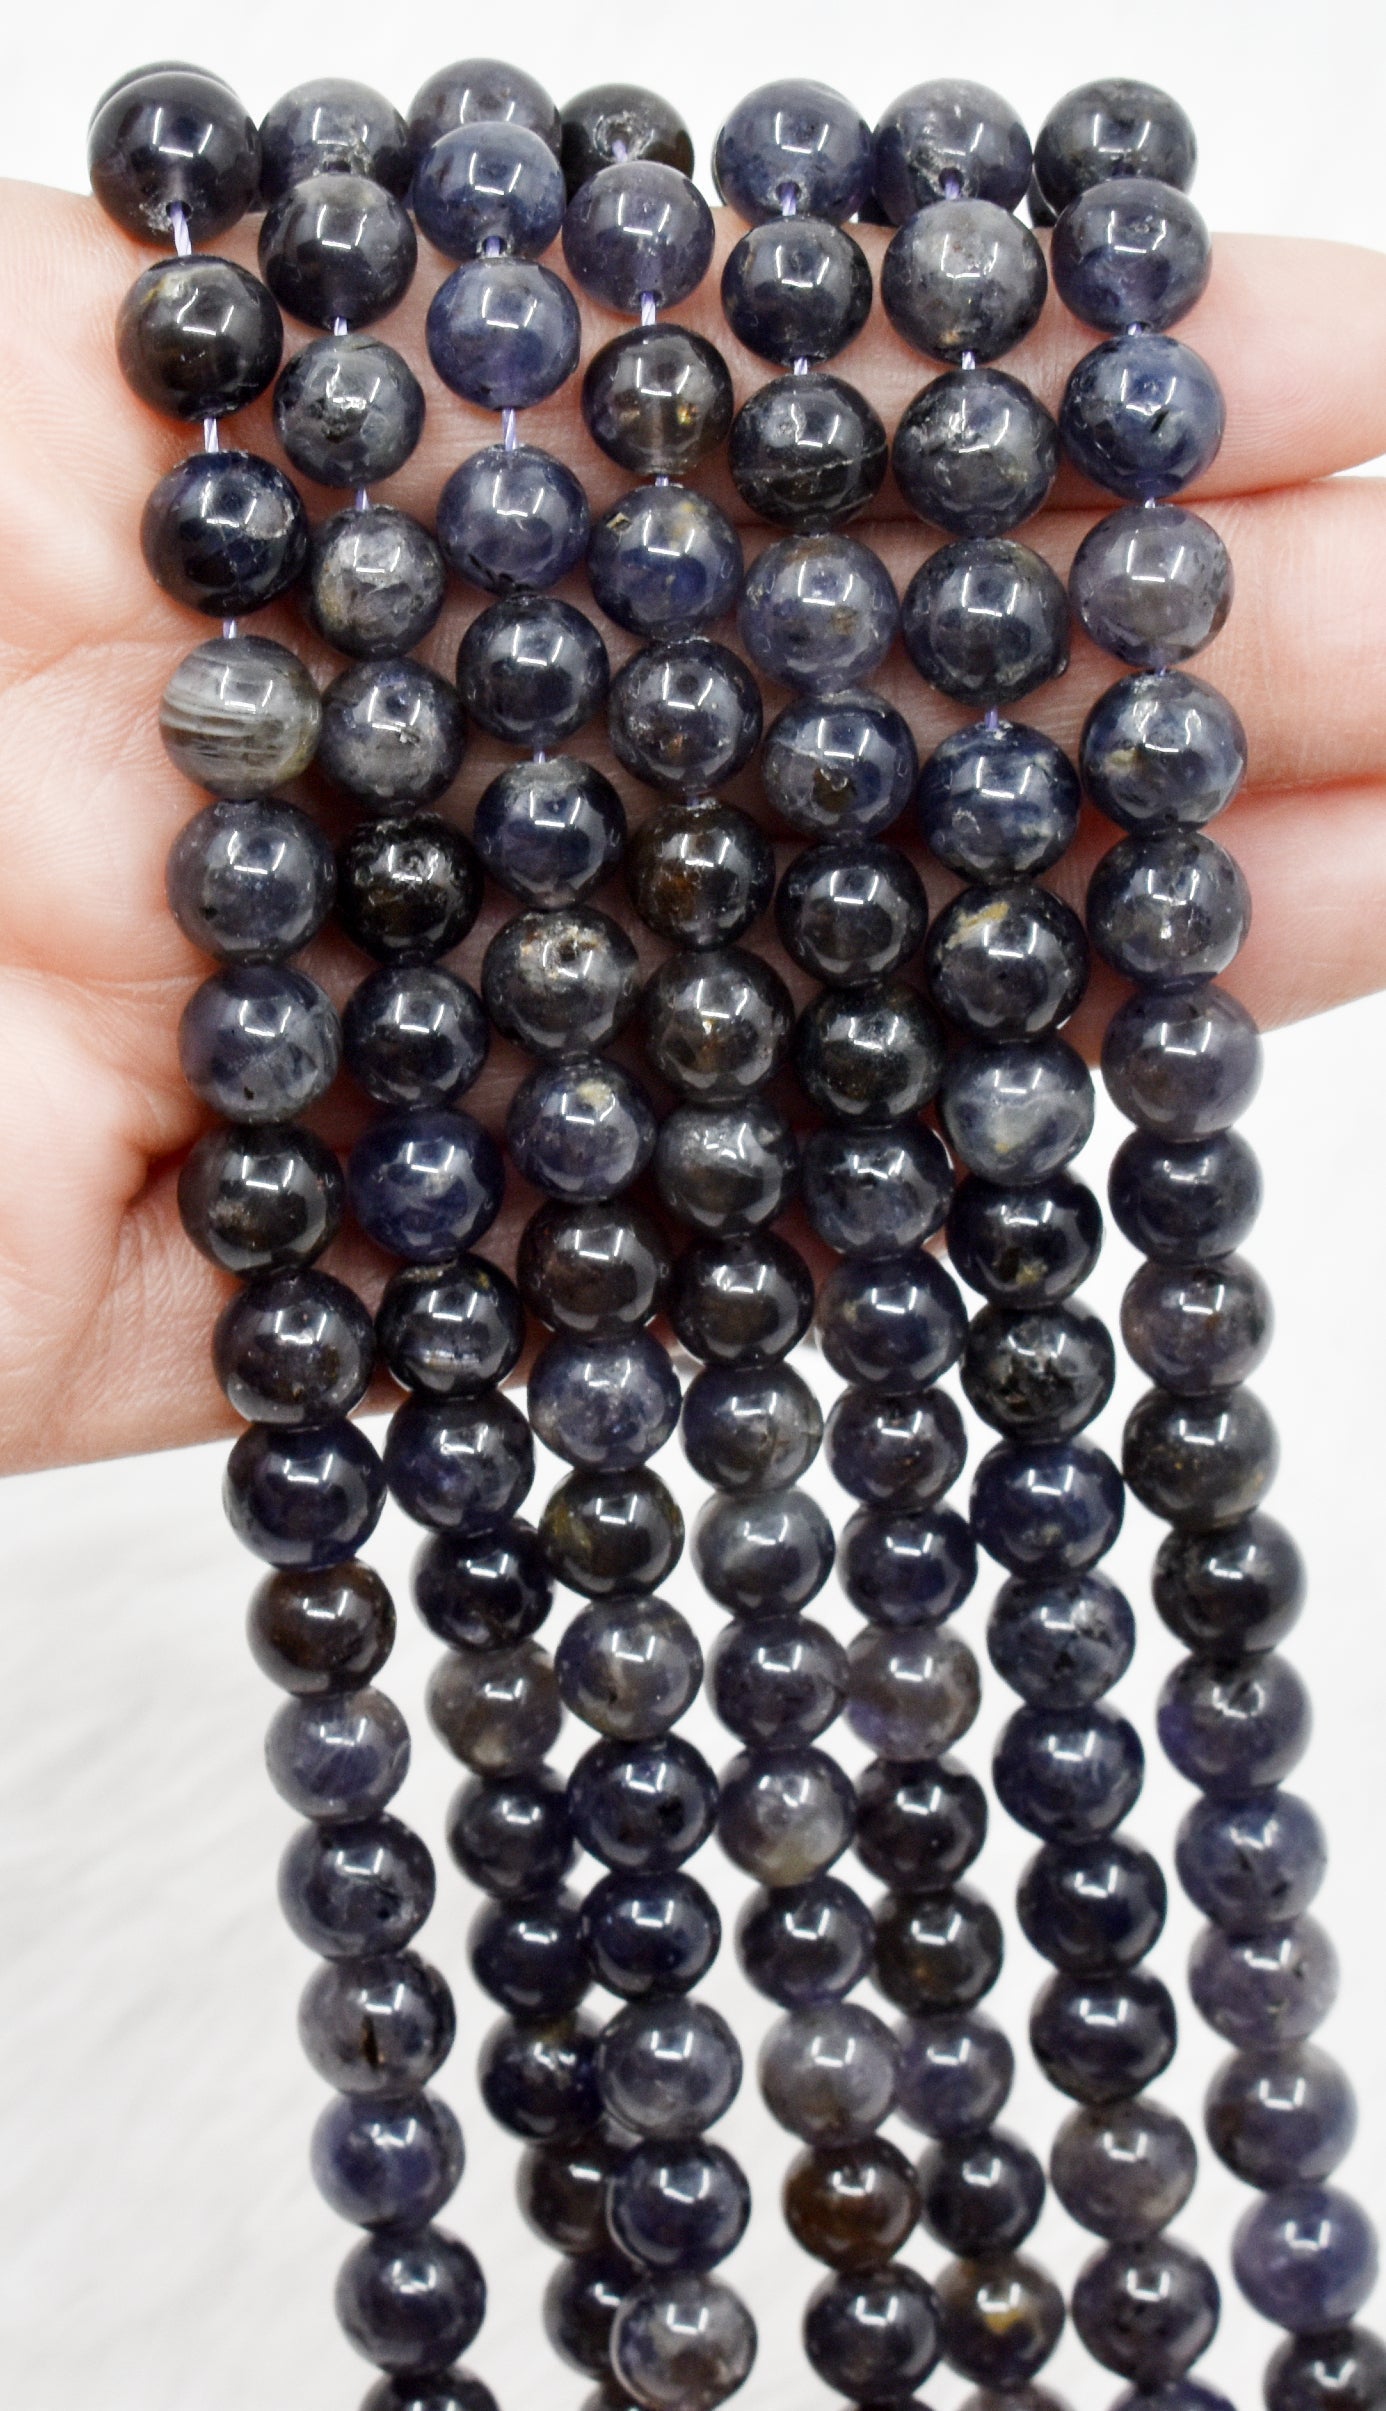 Iolite Beads, Natural Round Crystal Beads 6mm to 10mm